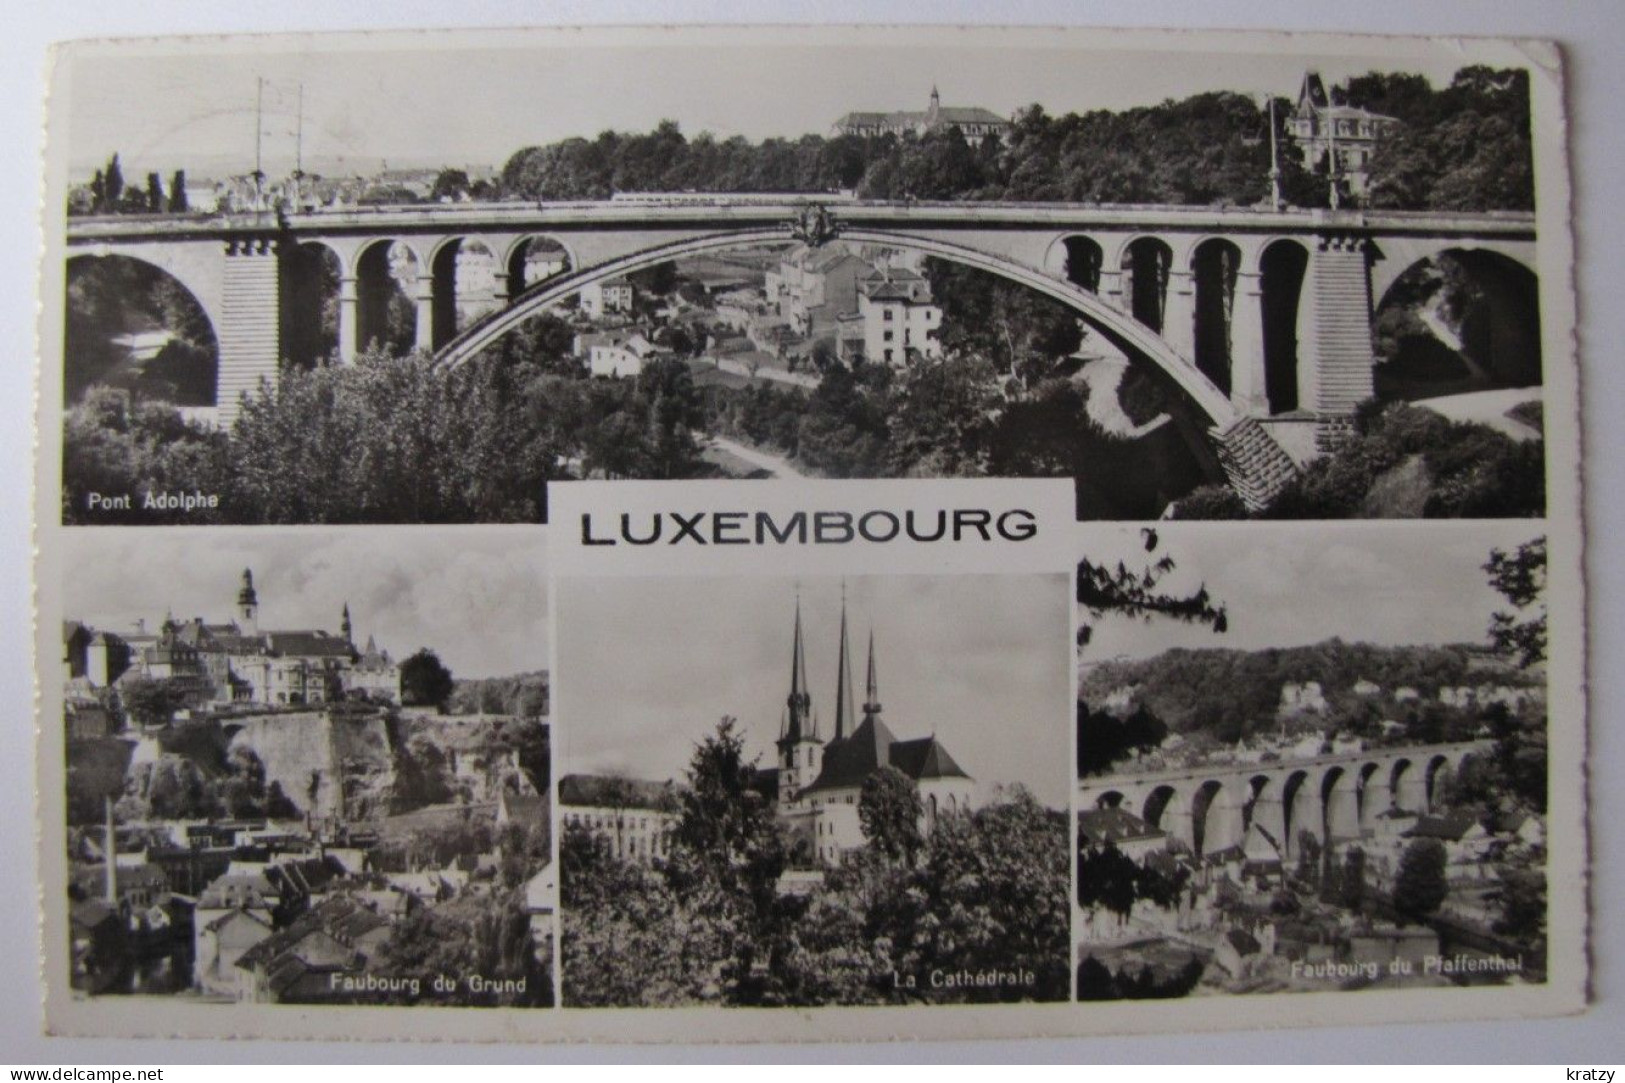 LUXEMBOURG - VILLE - Vues - 1955 - Luxemburg - Stadt